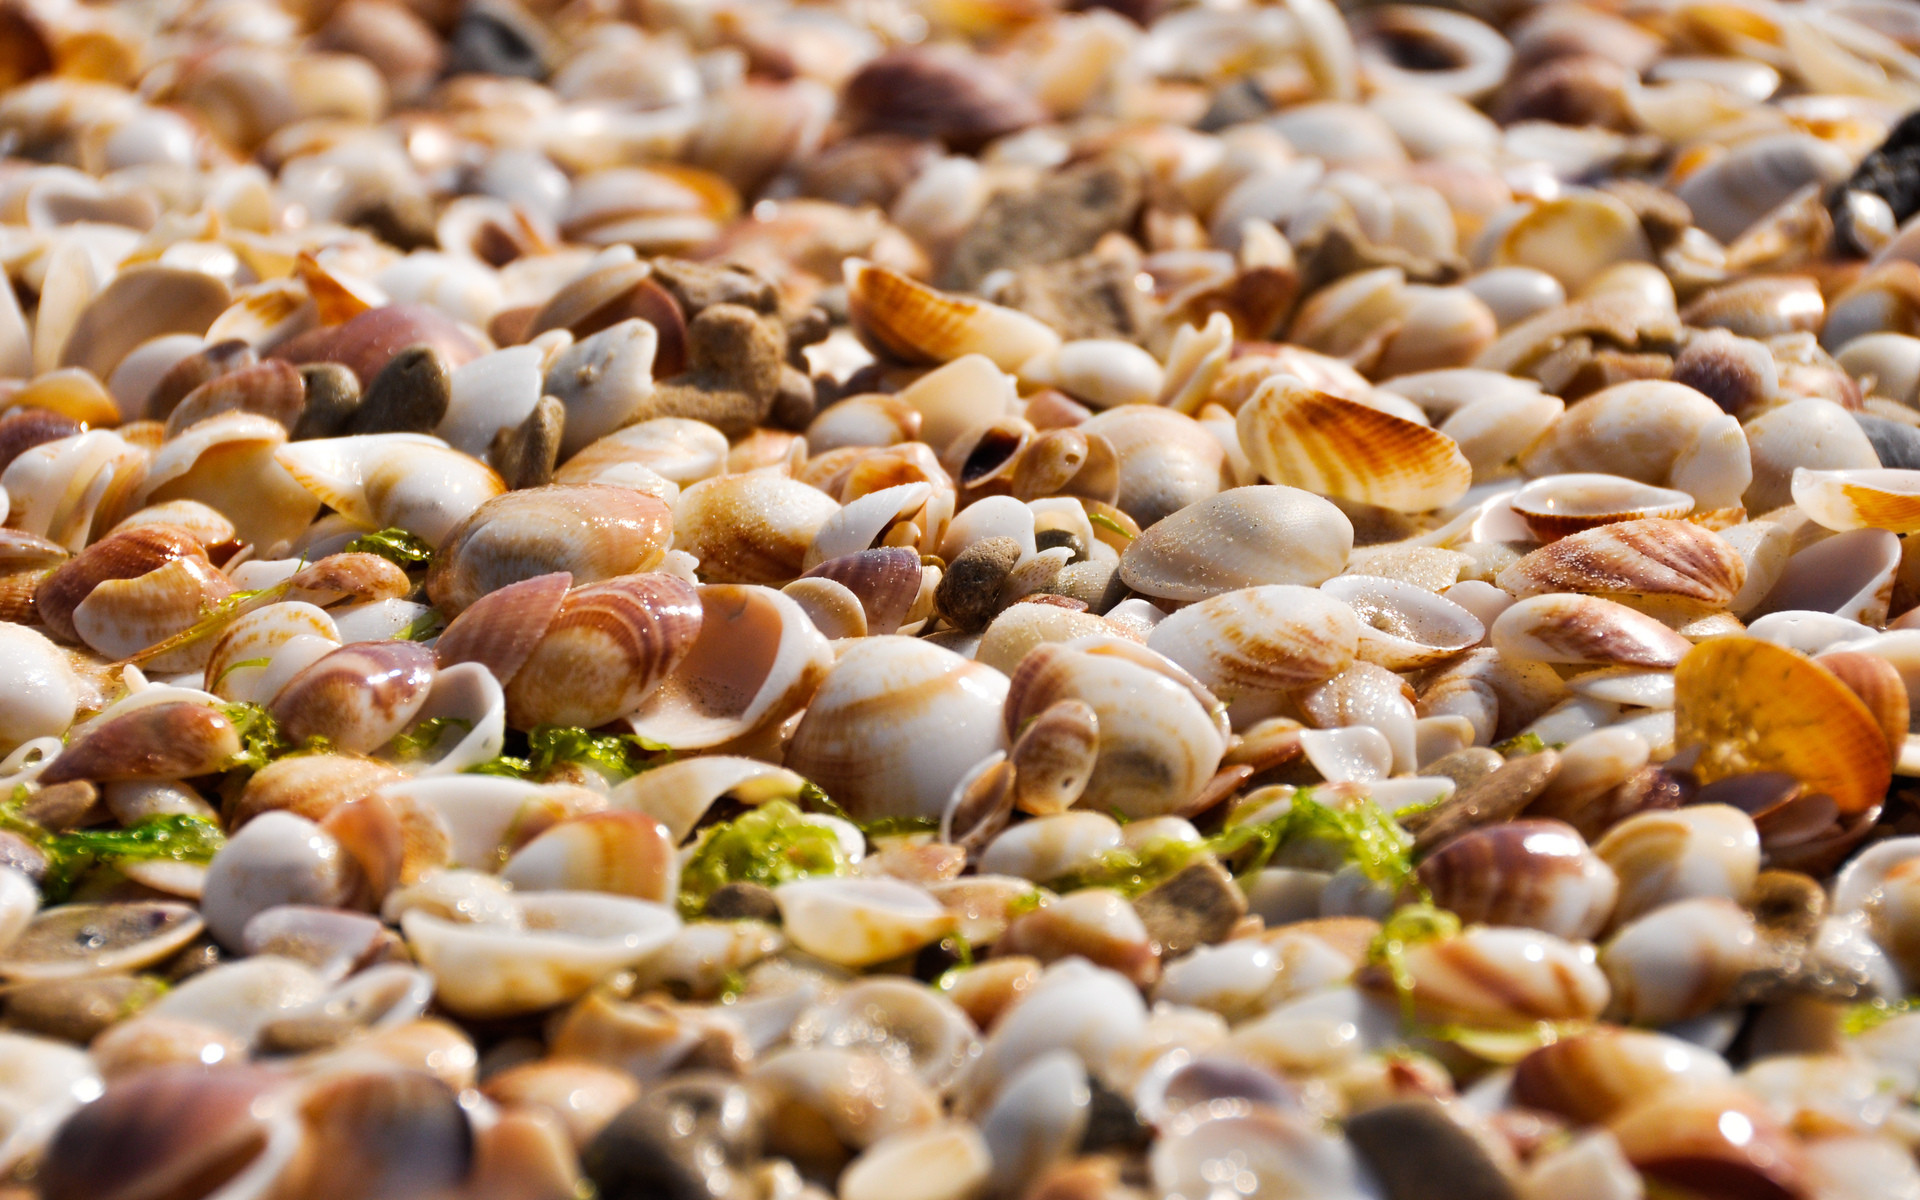 1920x1200 Picture of many empty shells on the beach: